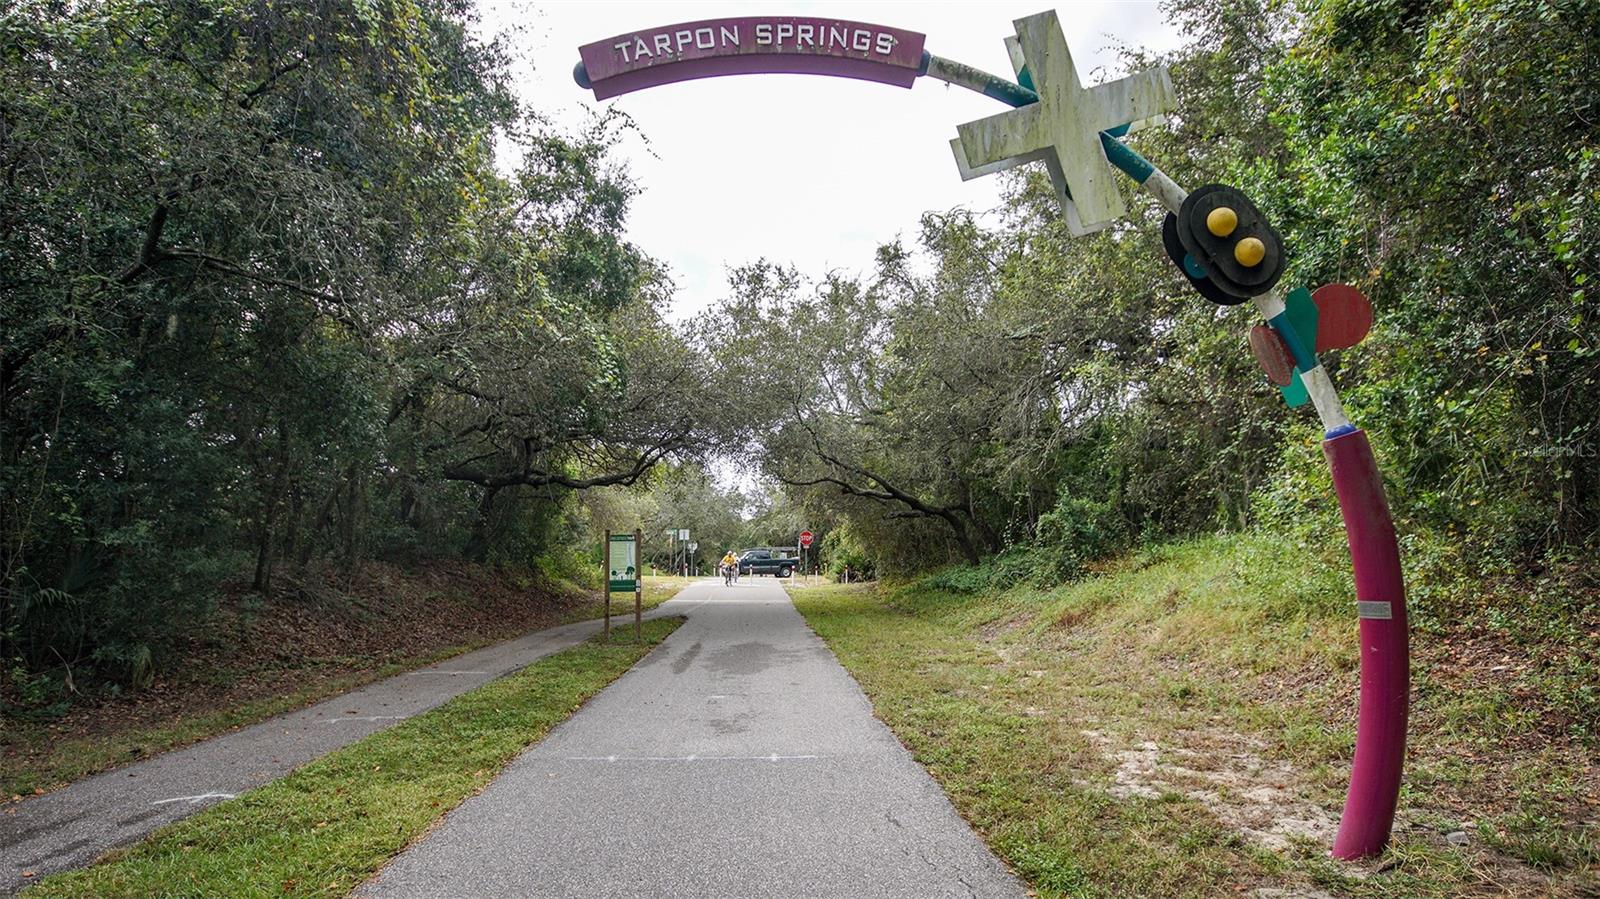 Enjoy the Pinellas Trail which extends from Tarpon Springs to St Pete.